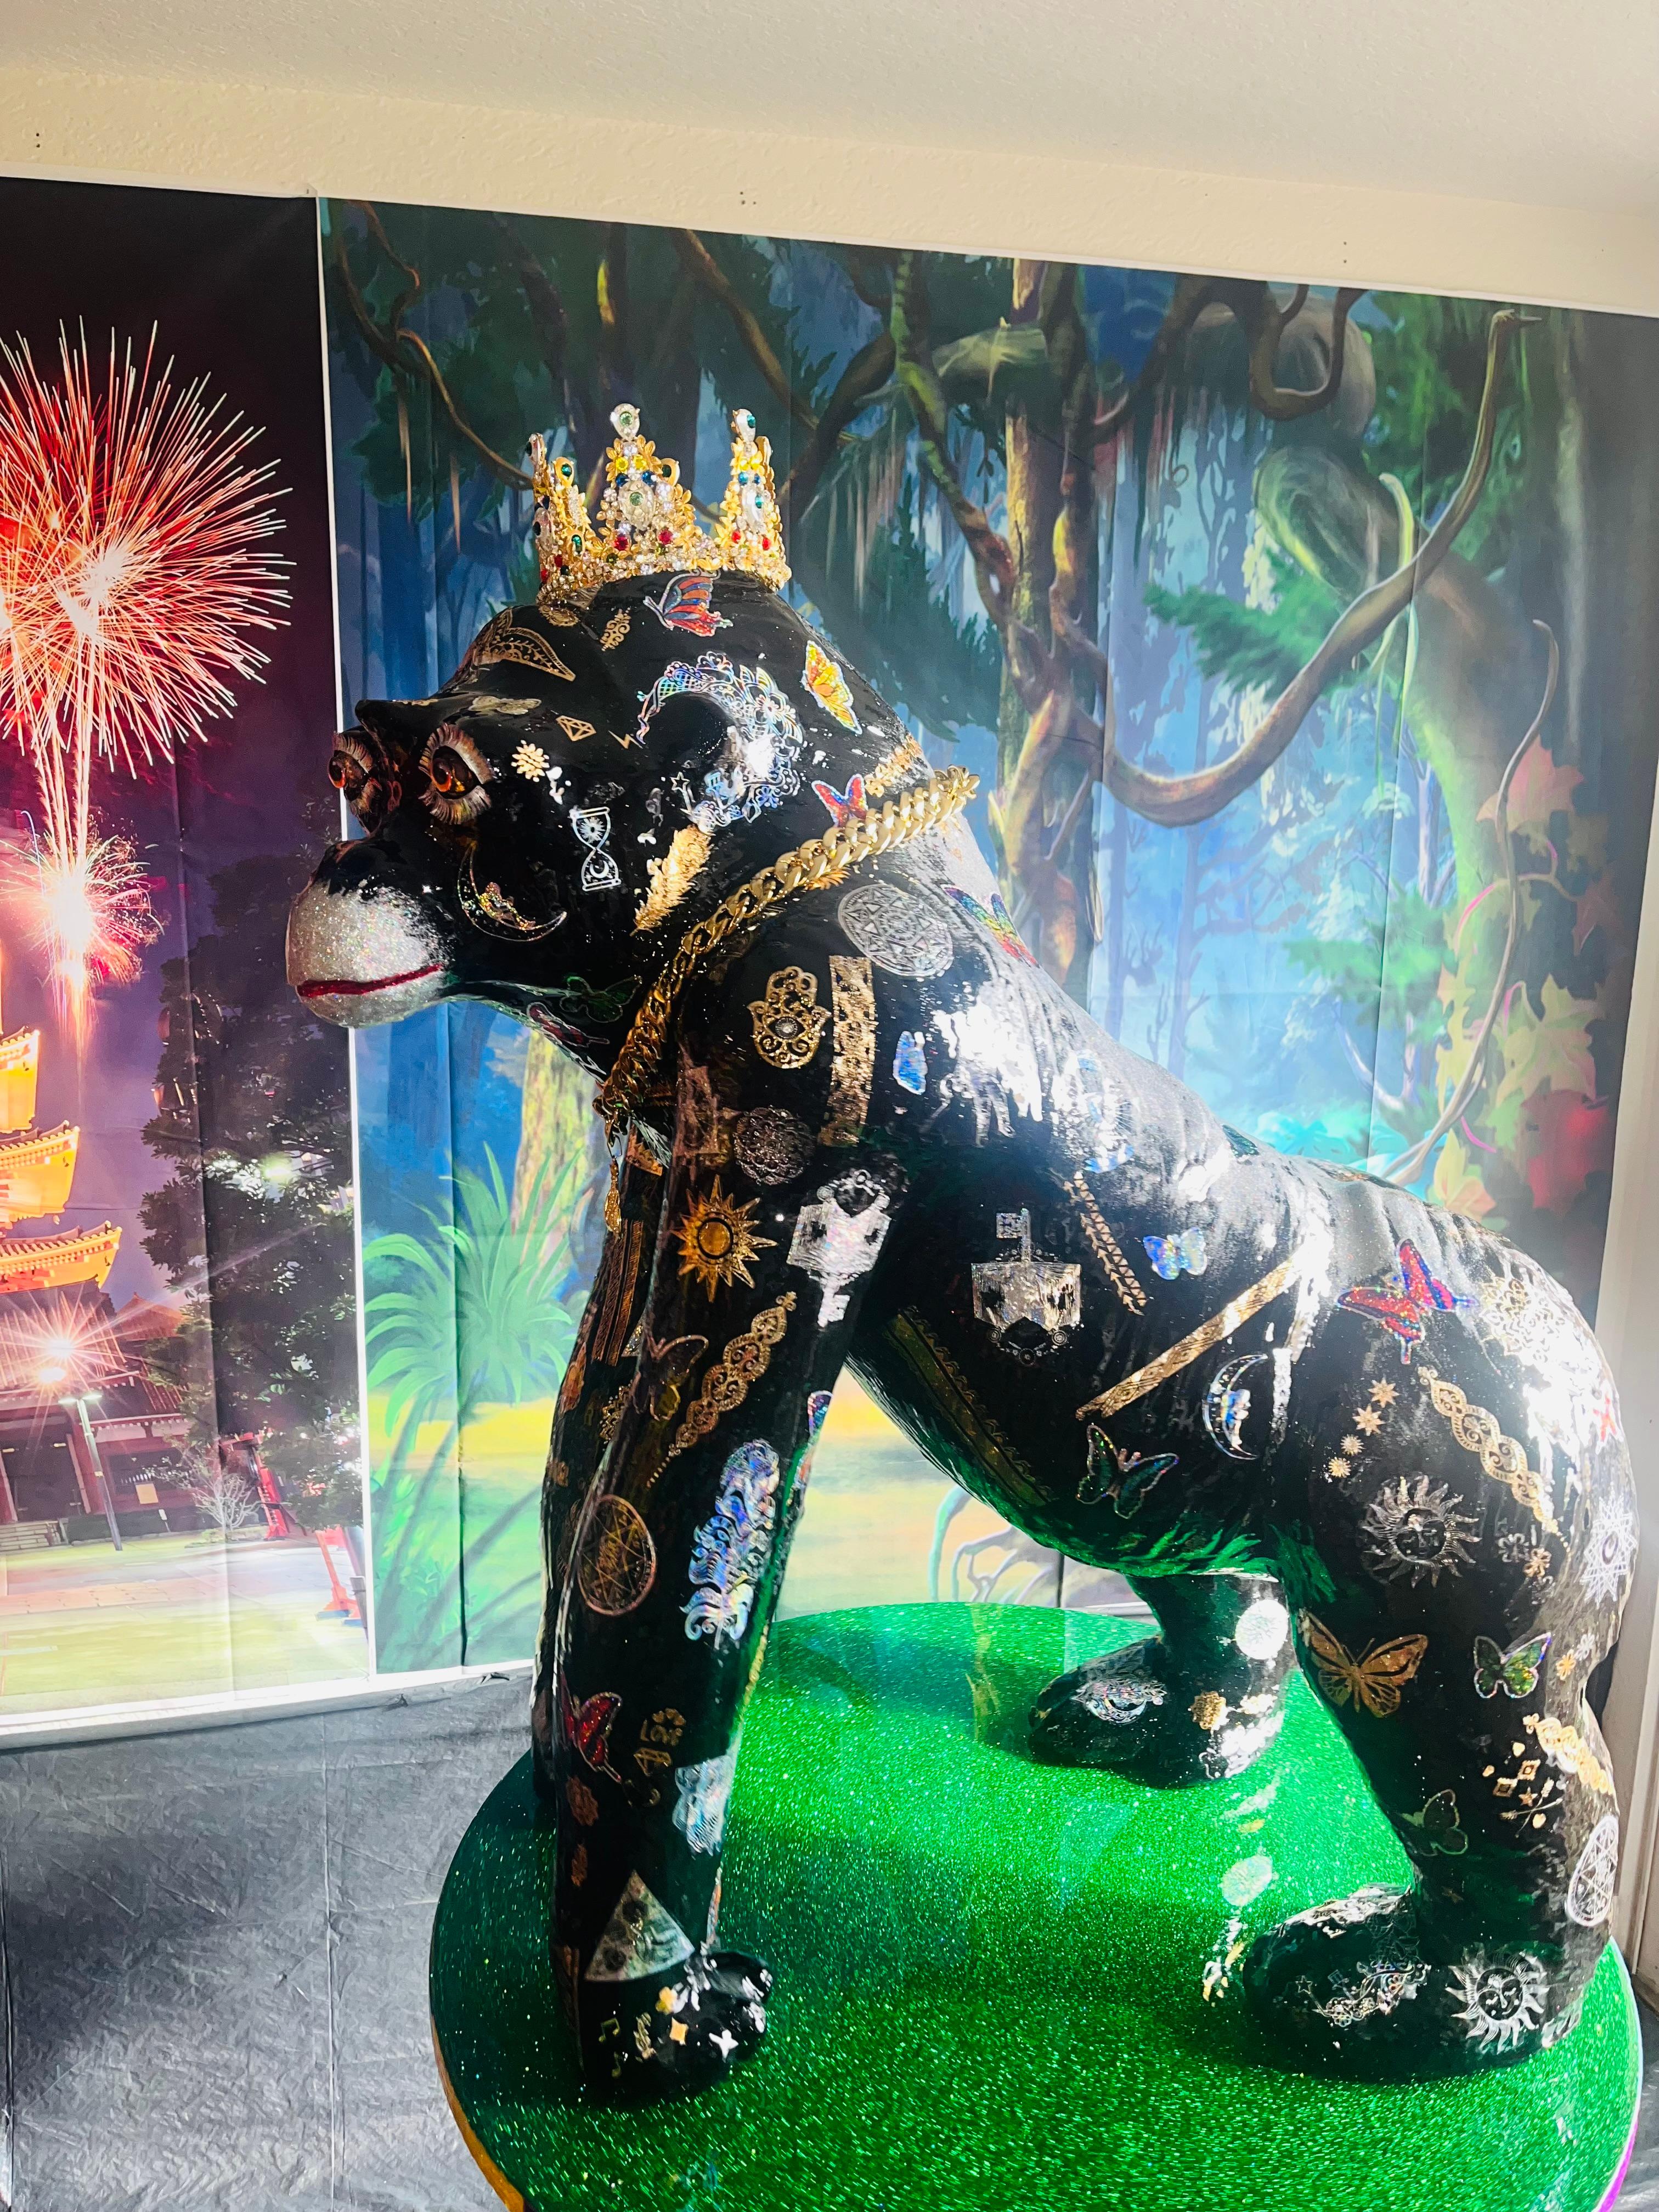               **ANNUAL SUPER SALE UNTIL JUNE 15TH ONLY**
*This Price Won't Be Repeated Again This Year-Take Advantage Of It*

Absolutely and positively one of a kind Gorilla Sculpture masterpiece.

There will never be another one like it.

This is a